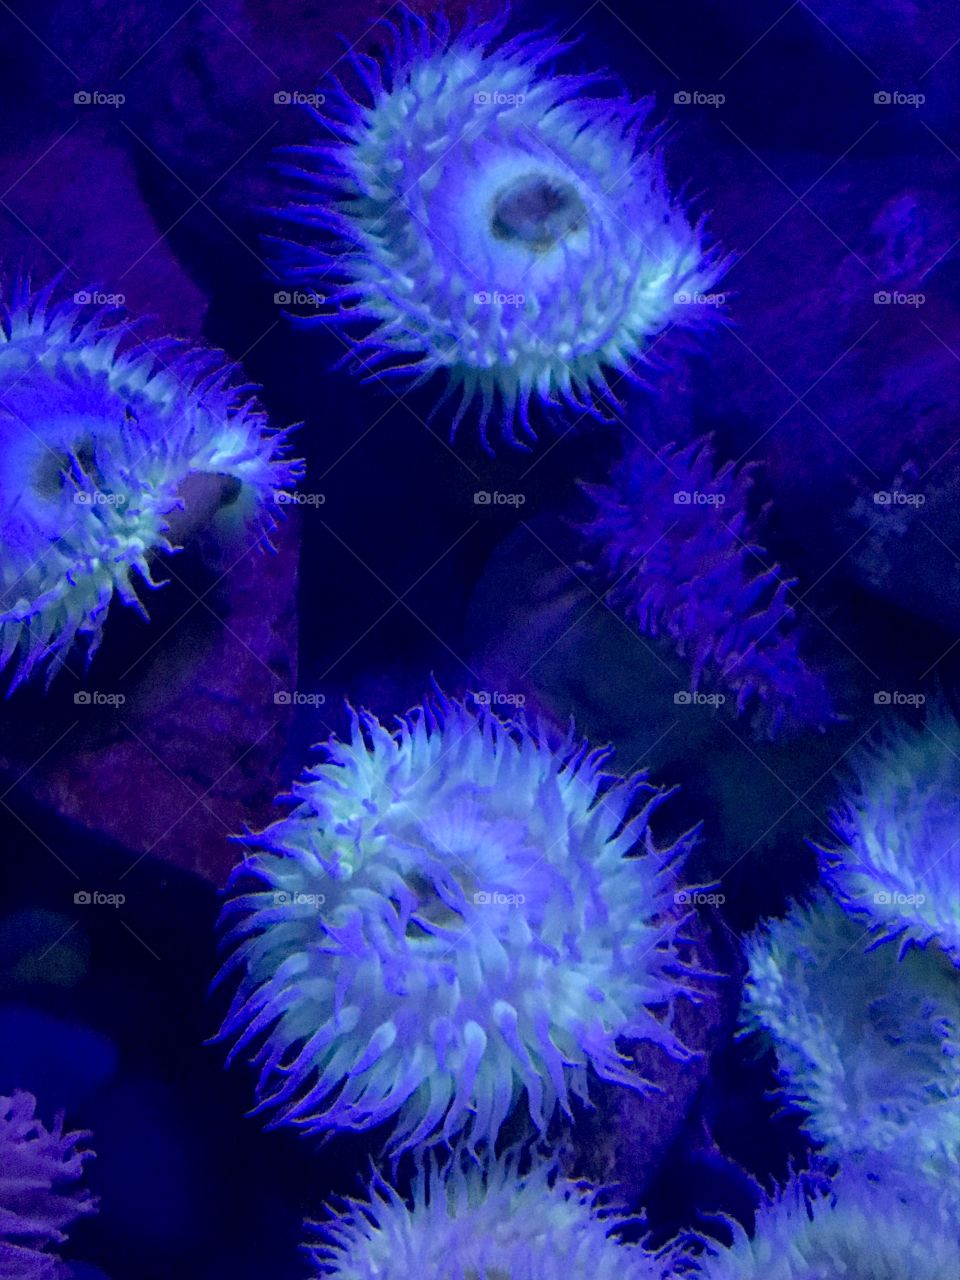 Glowing sea anemones living together peacefully